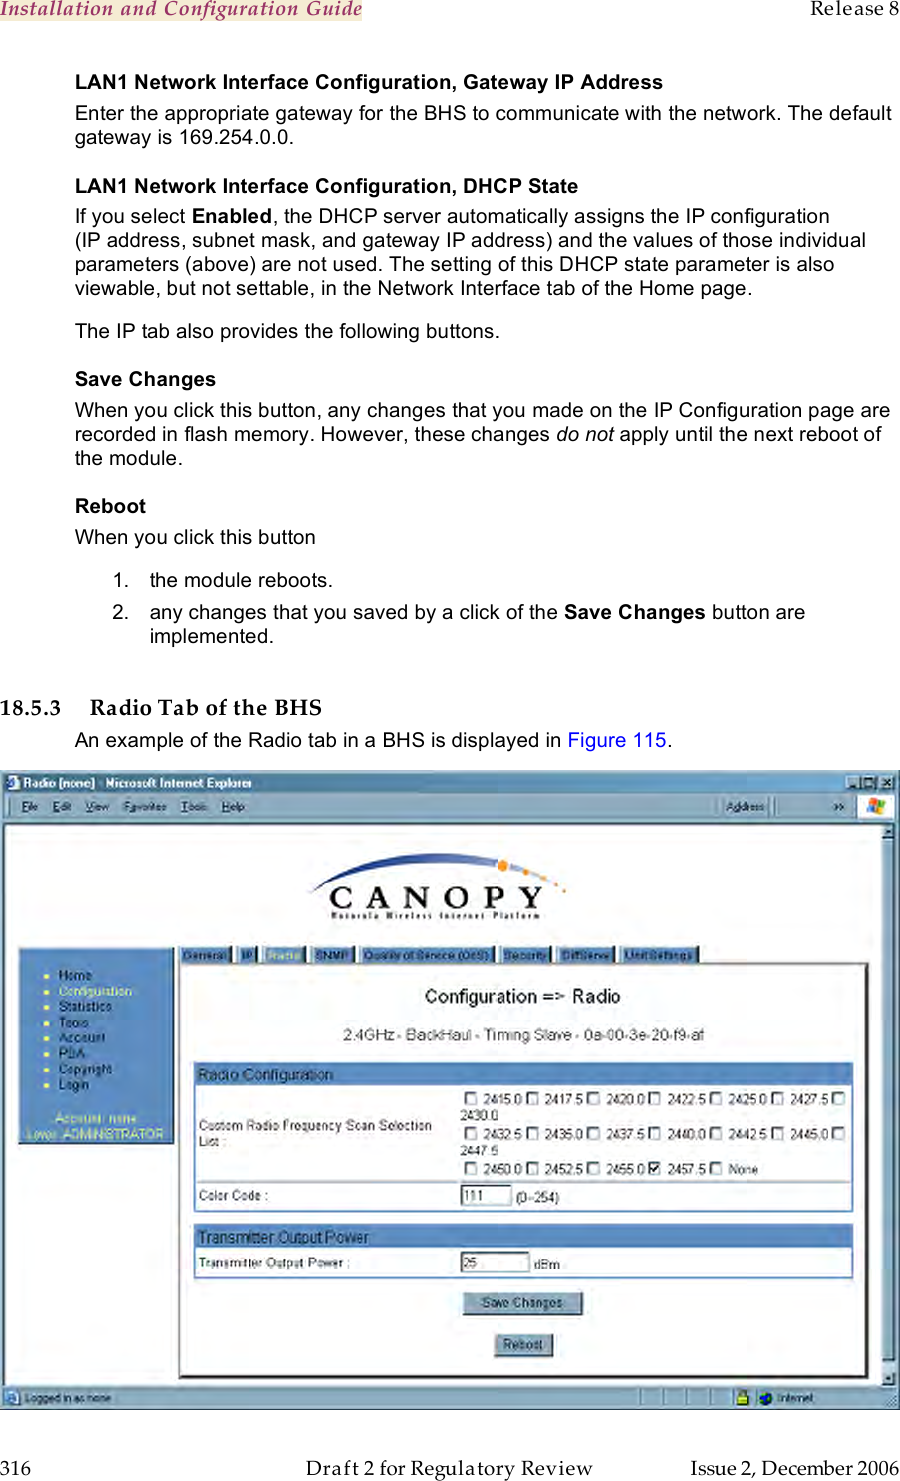 Installation and Configuration Guide    Release 8   316  Draft 2 for Regulatory Review  Issue 2, December 2006 LAN1 Network Interface Configuration, Gateway IP Address Enter the appropriate gateway for the BHS to communicate with the network. The default gateway is 169.254.0.0. LAN1 Network Interface Configuration, DHCP State If you select Enabled, the DHCP server automatically assigns the IP configuration (IP address, subnet mask, and gateway IP address) and the values of those individual parameters (above) are not used. The setting of this DHCP state parameter is also viewable, but not settable, in the Network Interface tab of the Home page.  The IP tab also provides the following buttons. Save Changes When you click this button, any changes that you made on the IP Configuration page are recorded in flash memory. However, these changes do not apply until the next reboot of the module. Reboot When you click this button 1.  the module reboots. 2.  any changes that you saved by a click of the Save Changes button are implemented.  18.5.3 Radio Tab of the BHS An example of the Radio tab in a BHS is displayed in Figure 115.  